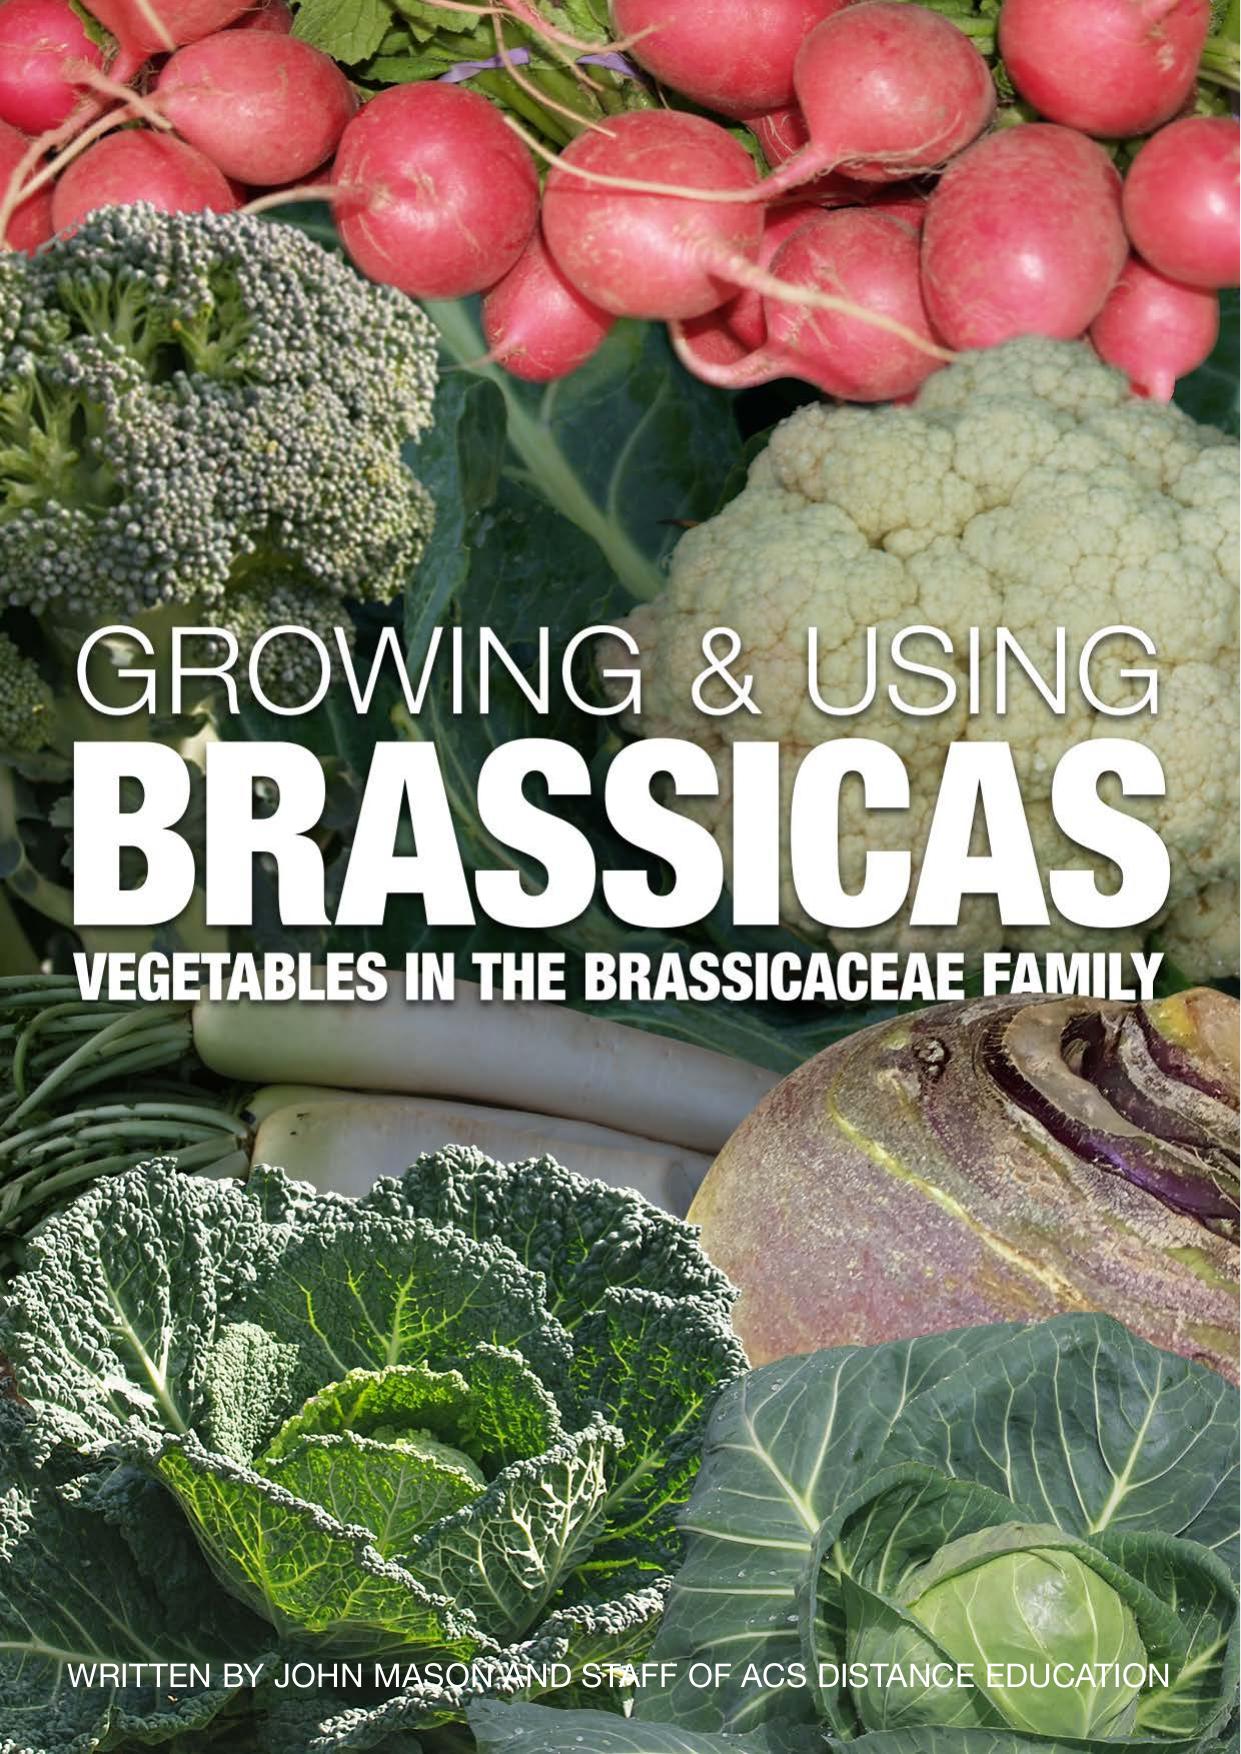 Growing and Using Brassicas by John Mason